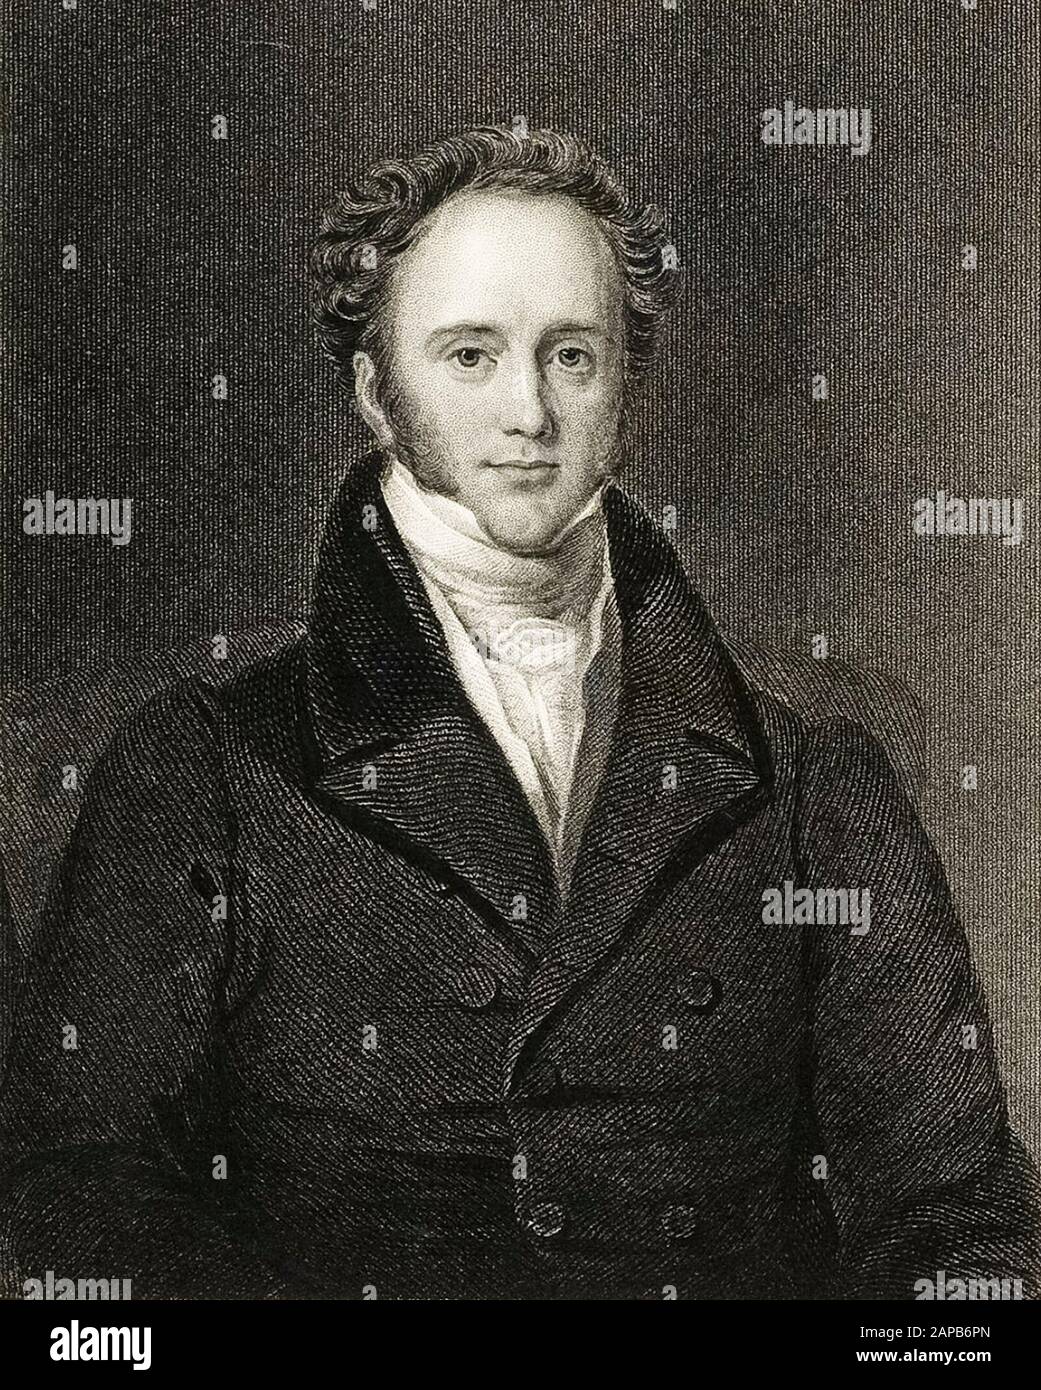 Lord Palmerston, Henry John Temple, 3rd Viscount Palmerston (1784-1865), twice British Prime Minister, portrait engraving, 1841 Stock Photo